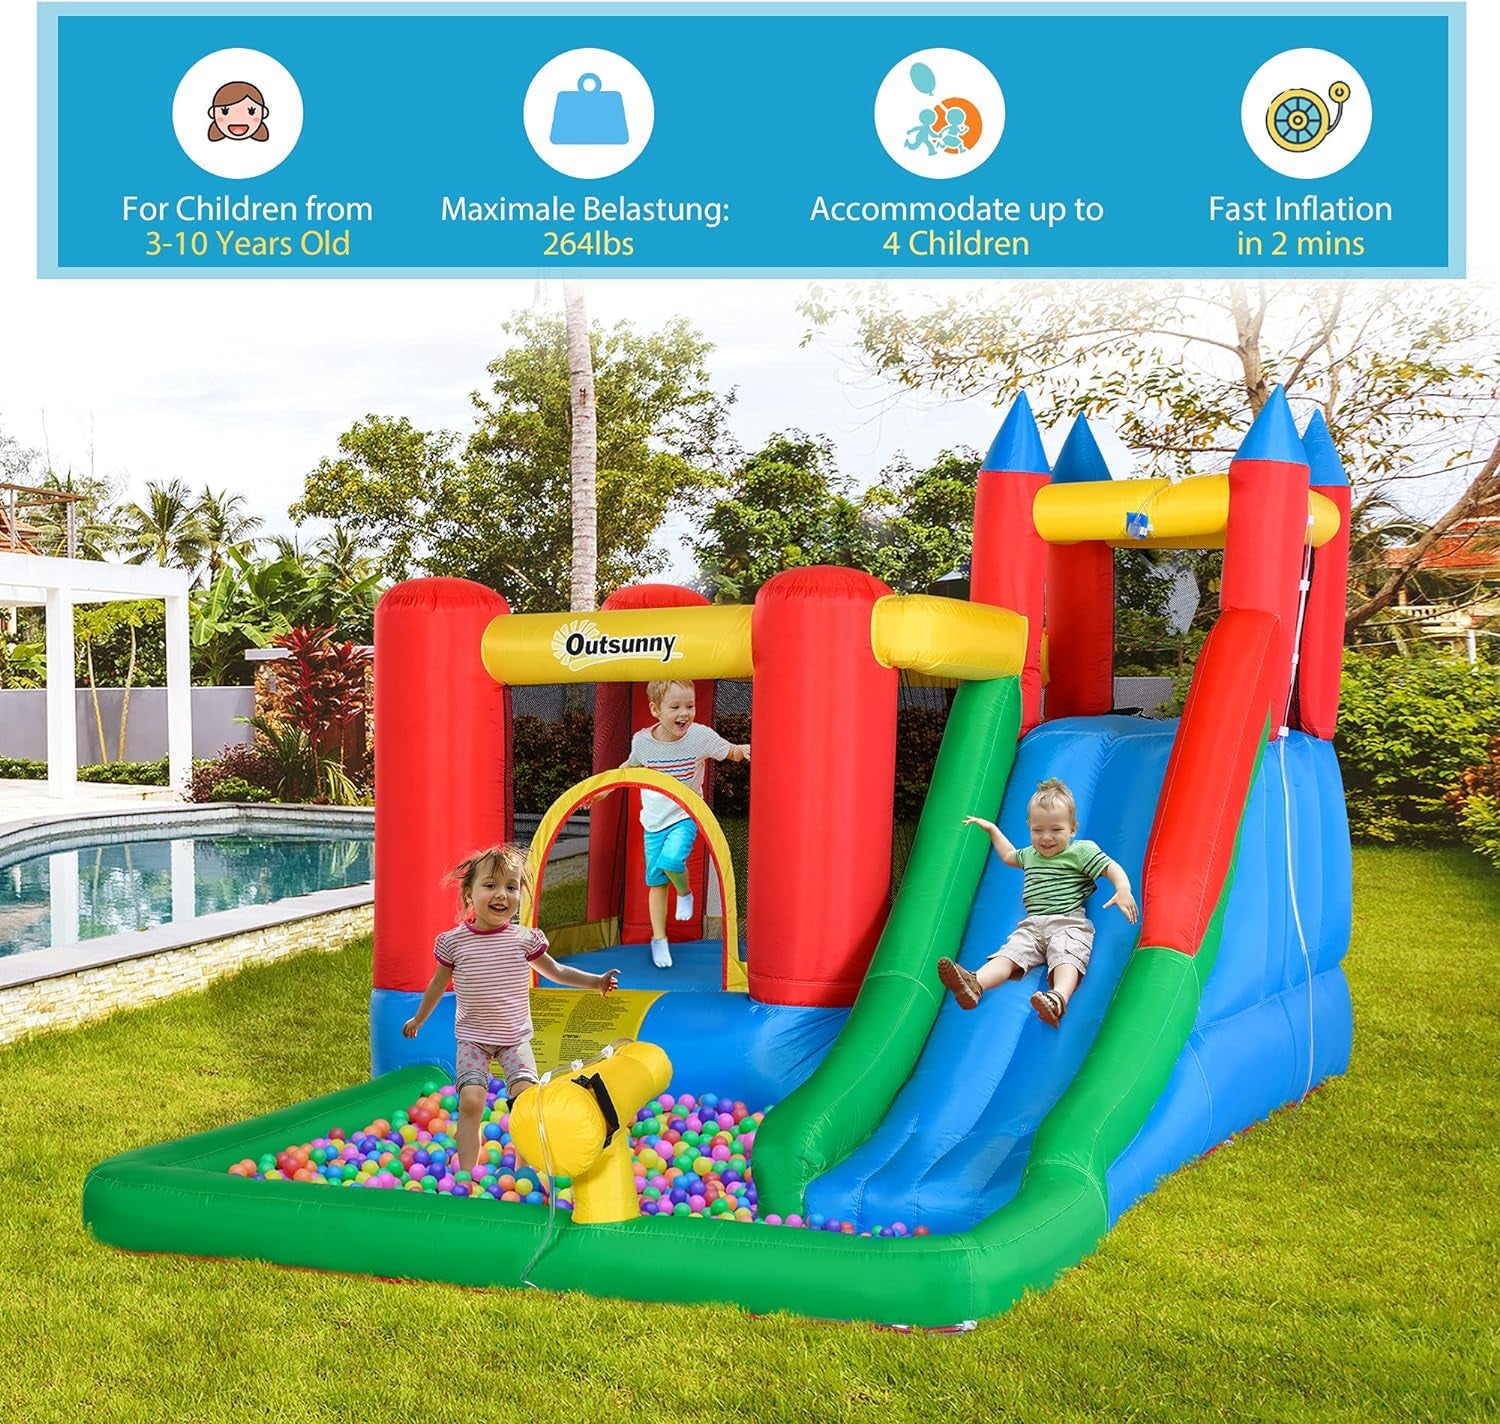 6-In-1 Kids Bounce House Inflatable Water Slide with Pool, Water Cannon, Climbing Wall, Inflator Included, Jumping Castle Kids Backyard Activity Outdoor Water Play Toy